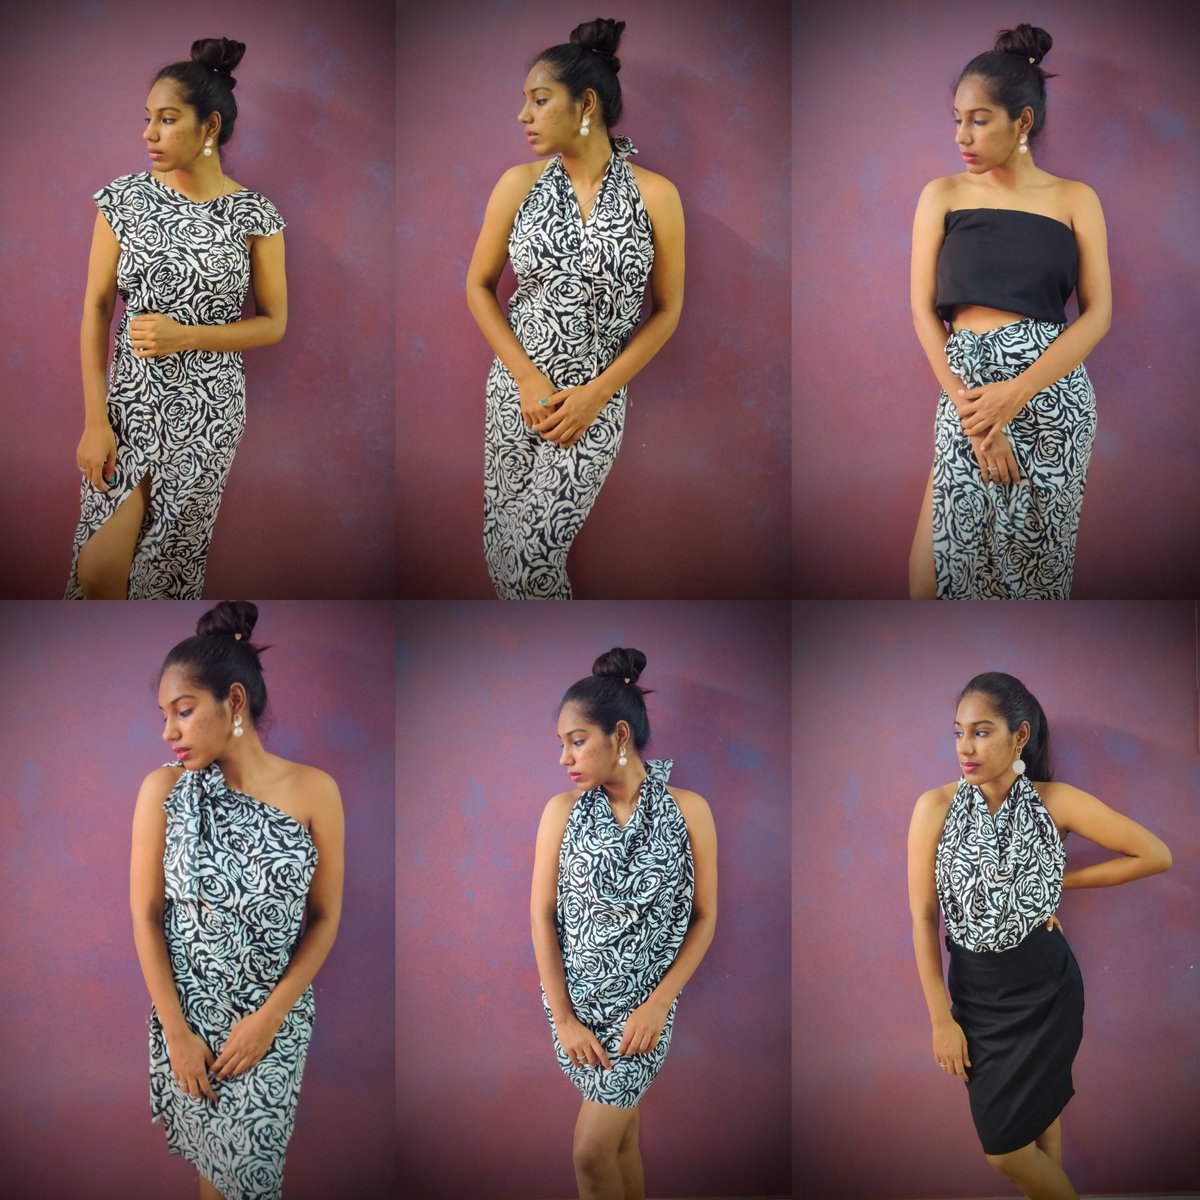 One fabric and 6 ways of wearing it #fashion #fabricdraping #multipleways #fashiondesigner #fashionblogger